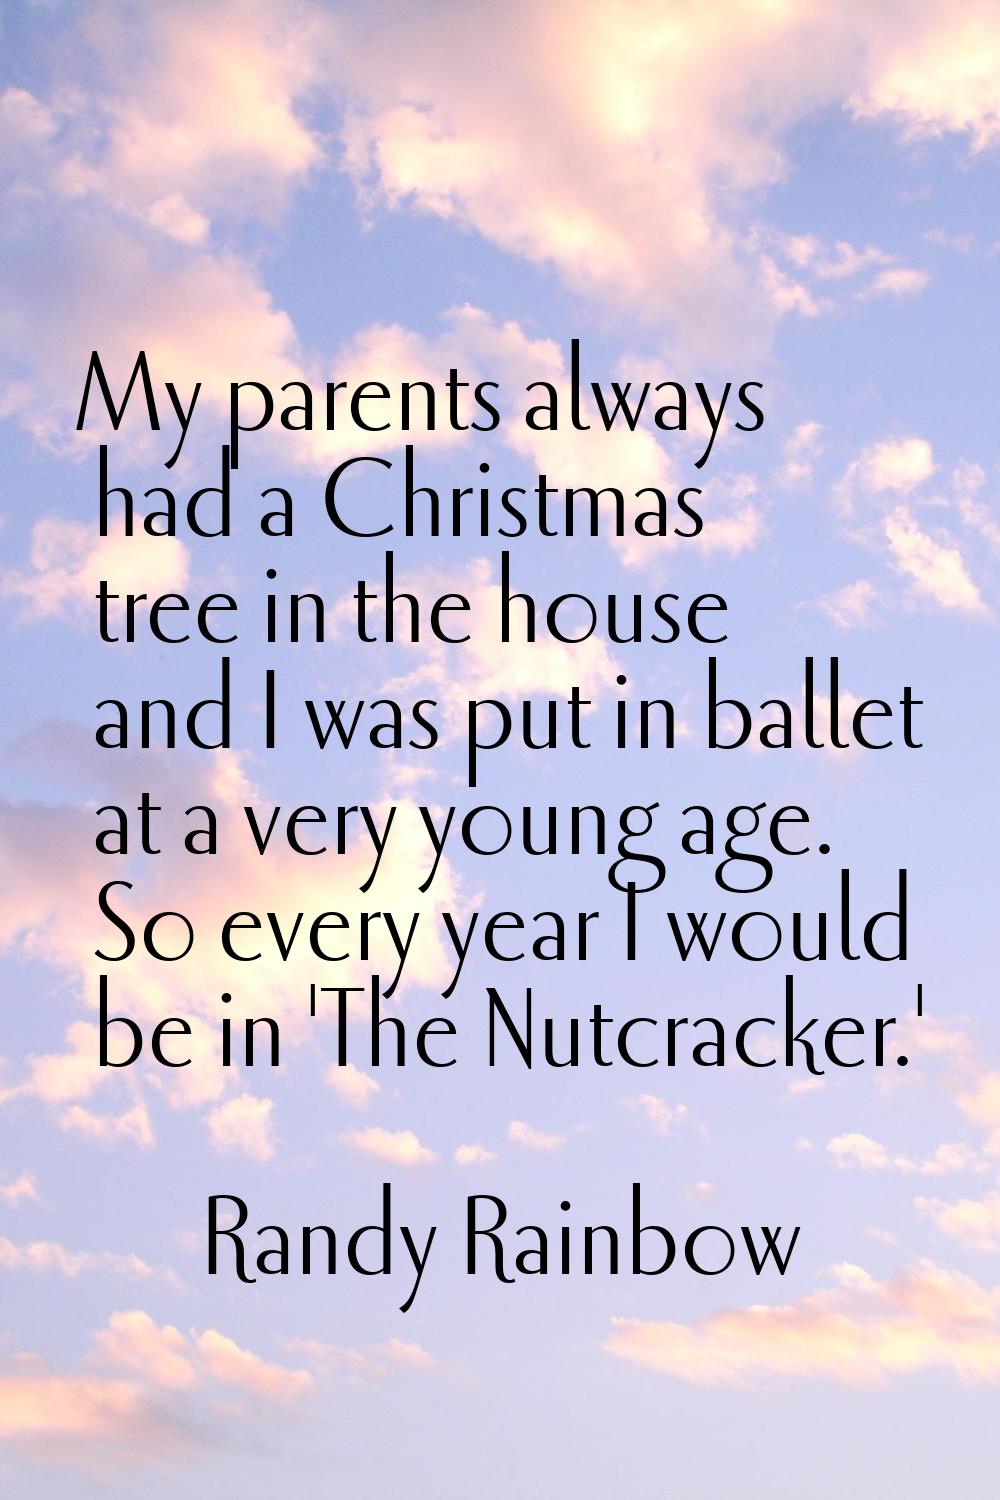 My parents always had a Christmas tree in the house and I was put in ballet at a very young age. So